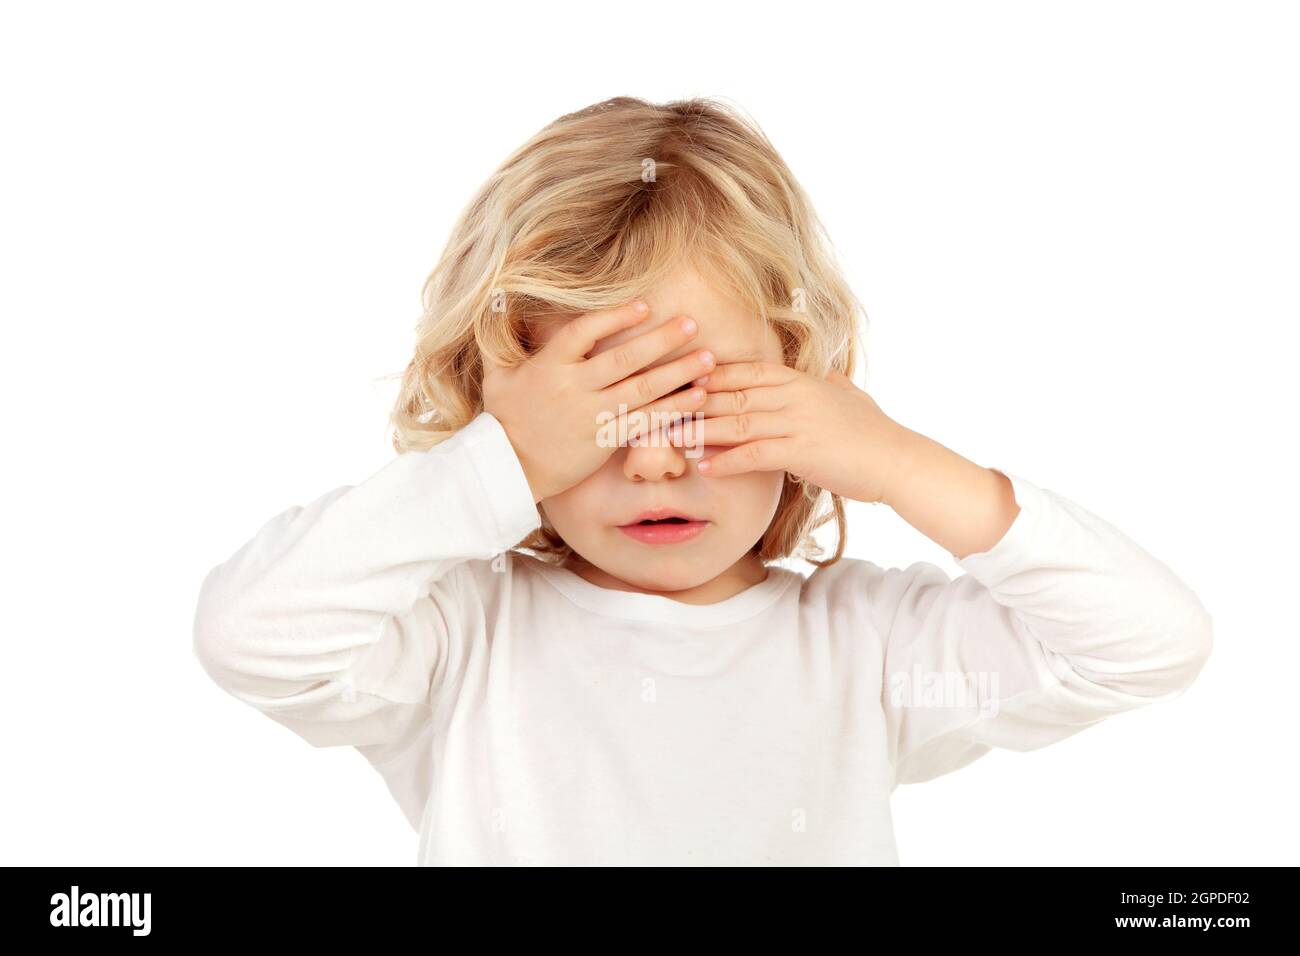 Sad blond child covering the face with his hands isoalted on a white background Stock Photo